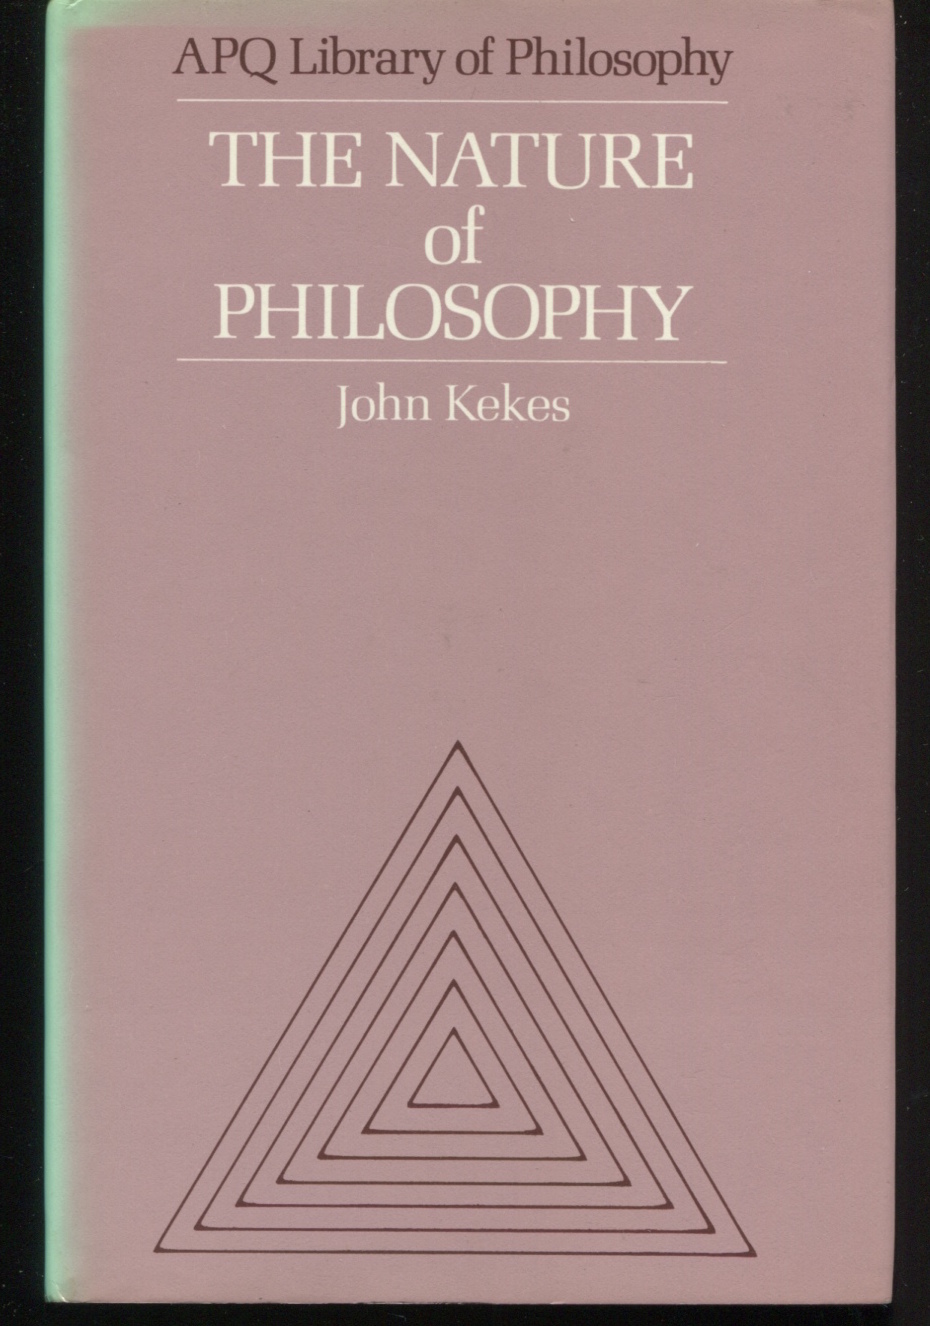 The Nature of Philosophy.